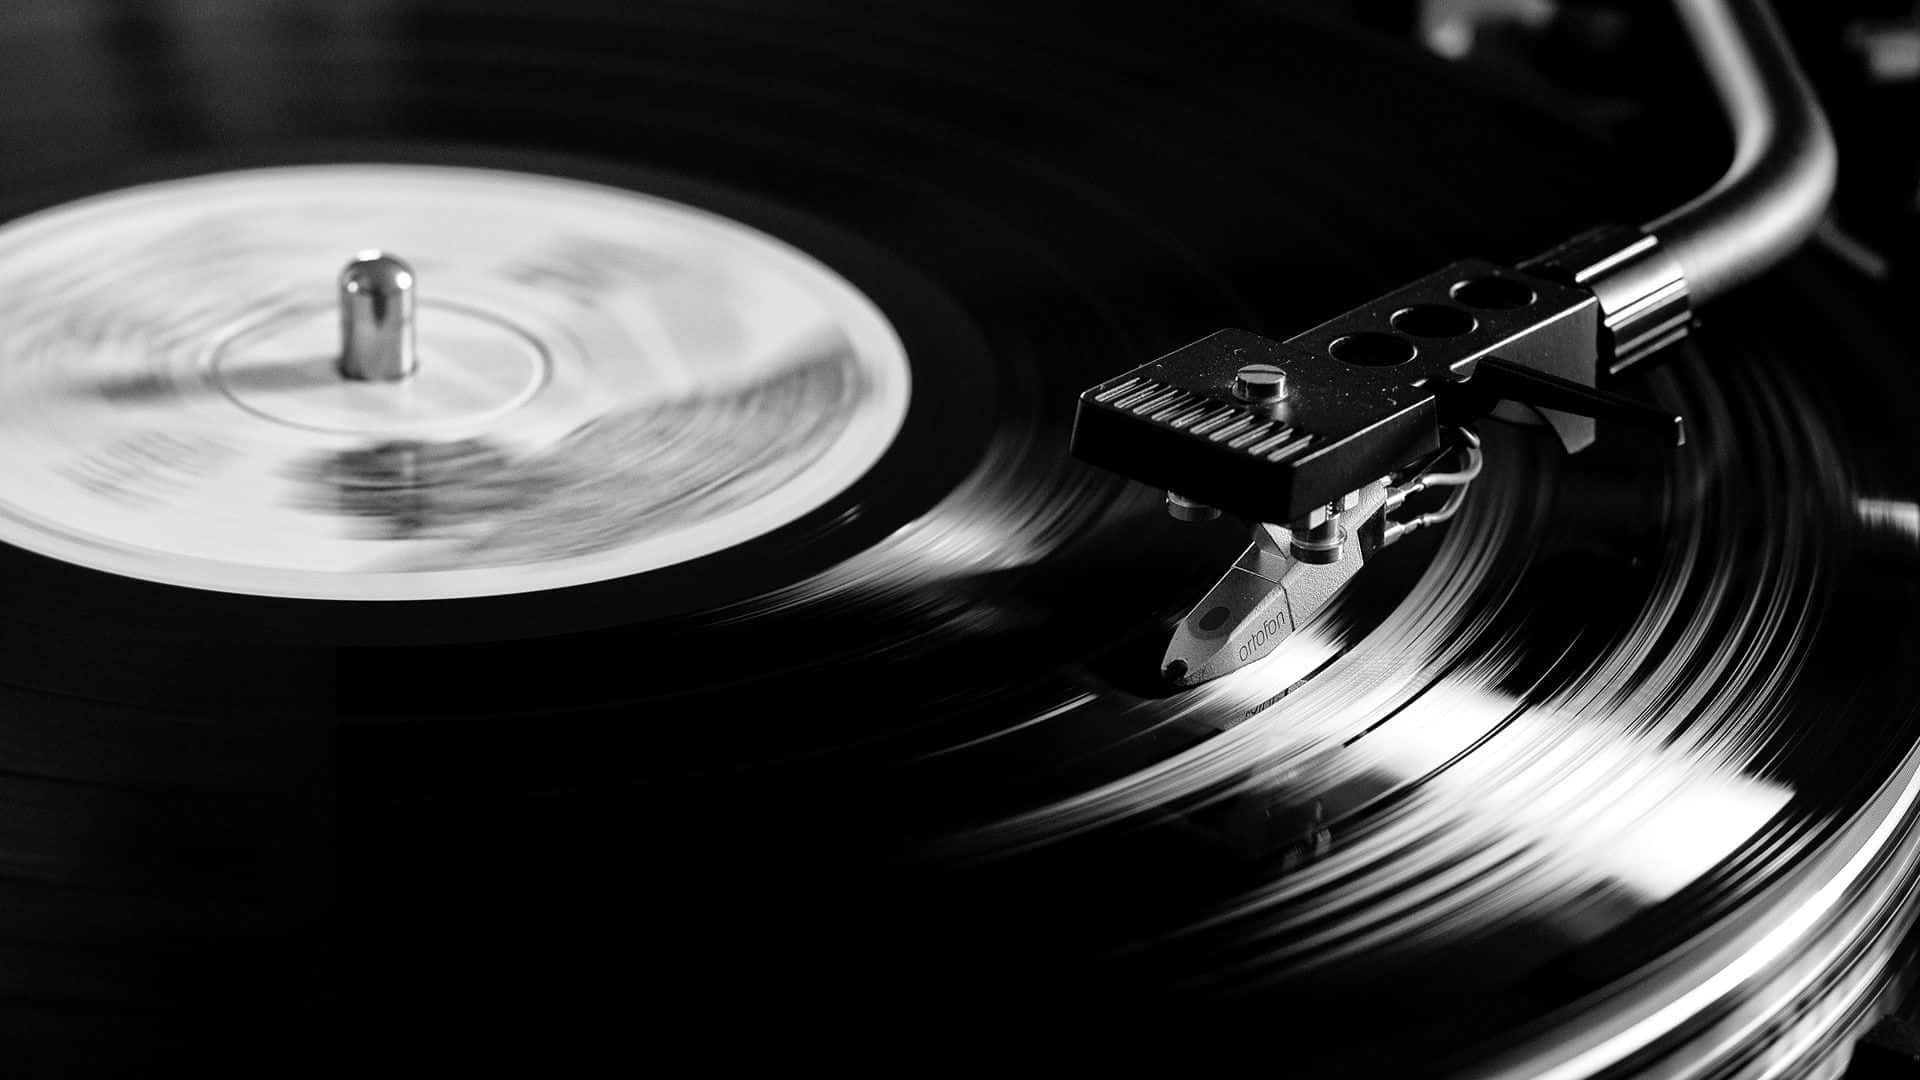 "time-honored Tradition: A Vinyl Record Spins On A Turntable." Wallpaper